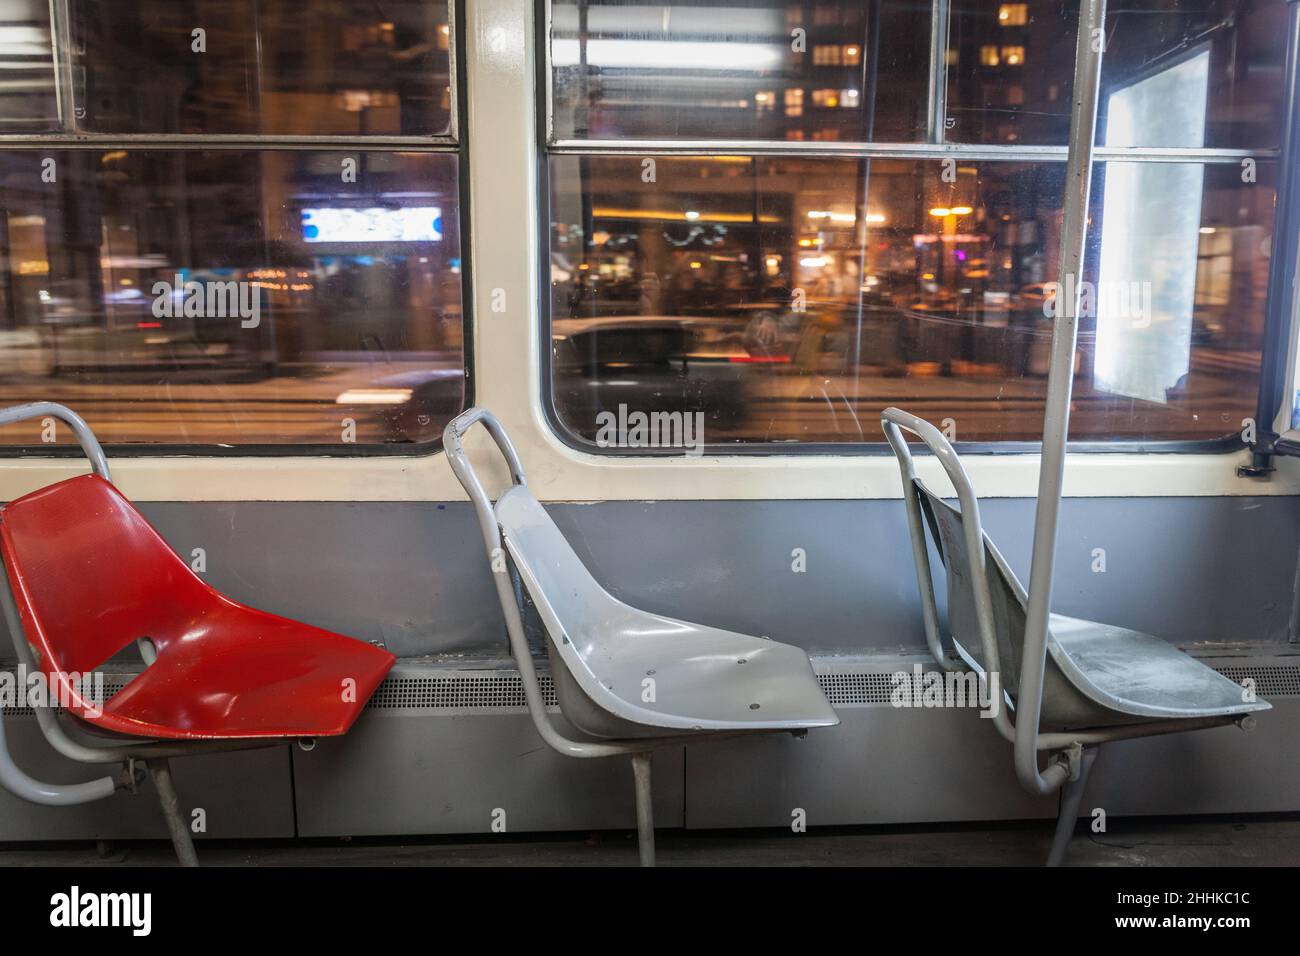 Picture of empty plastic seats in a belgrade tramway car with a speed blur in background, at night. Stock Photo